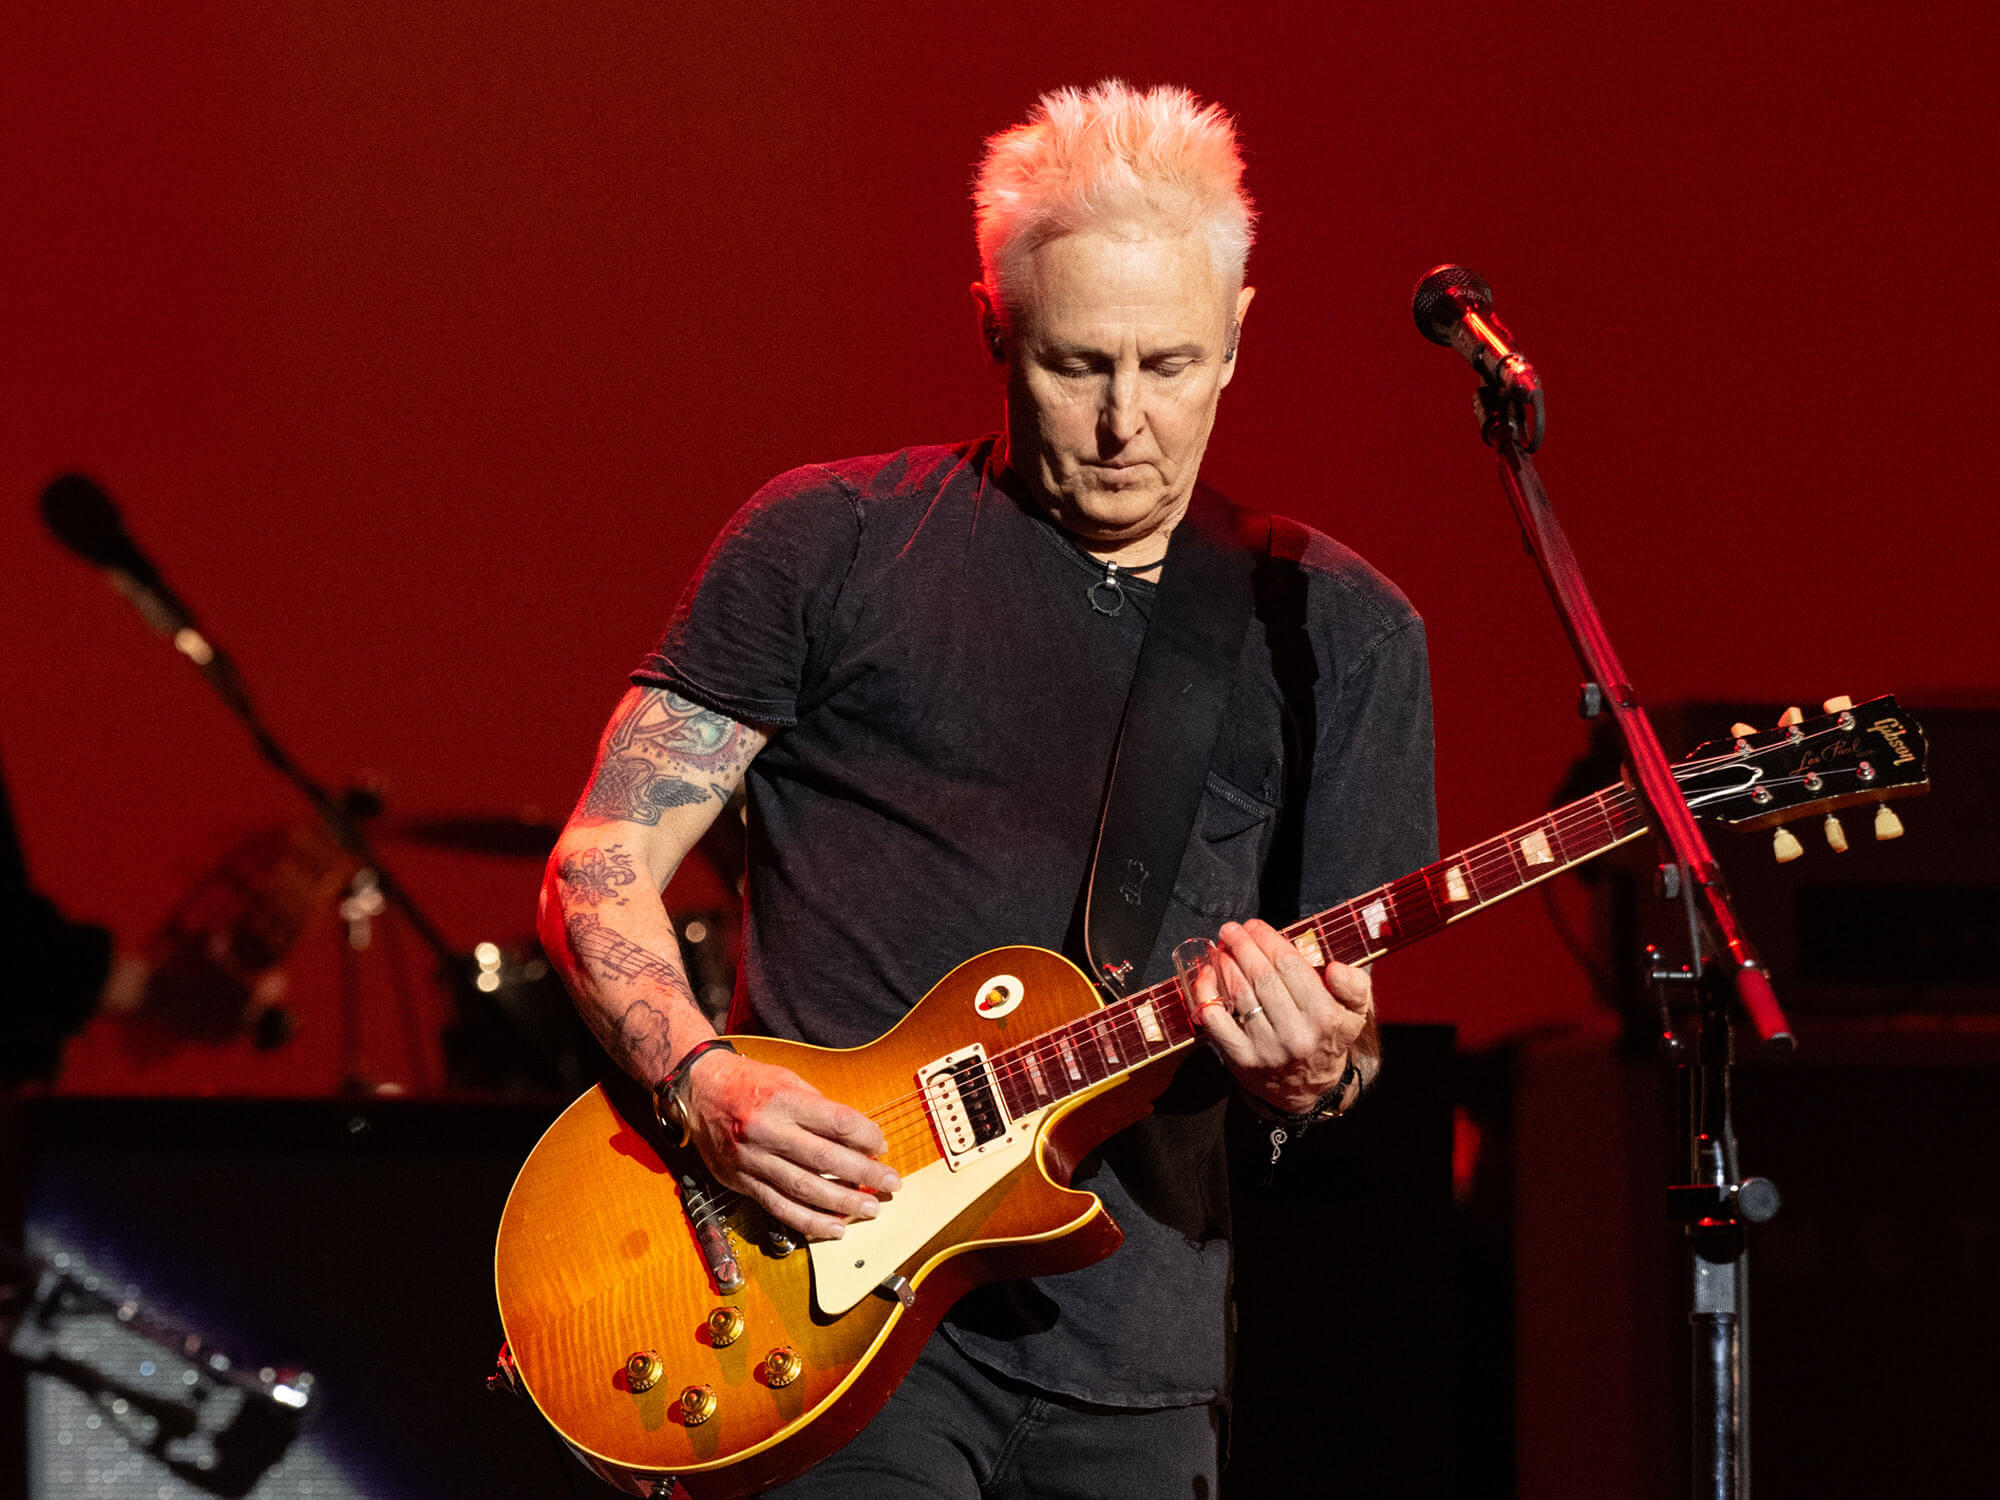 Mike McCready performing live at the Rogers Arena in Vancouver, Canada